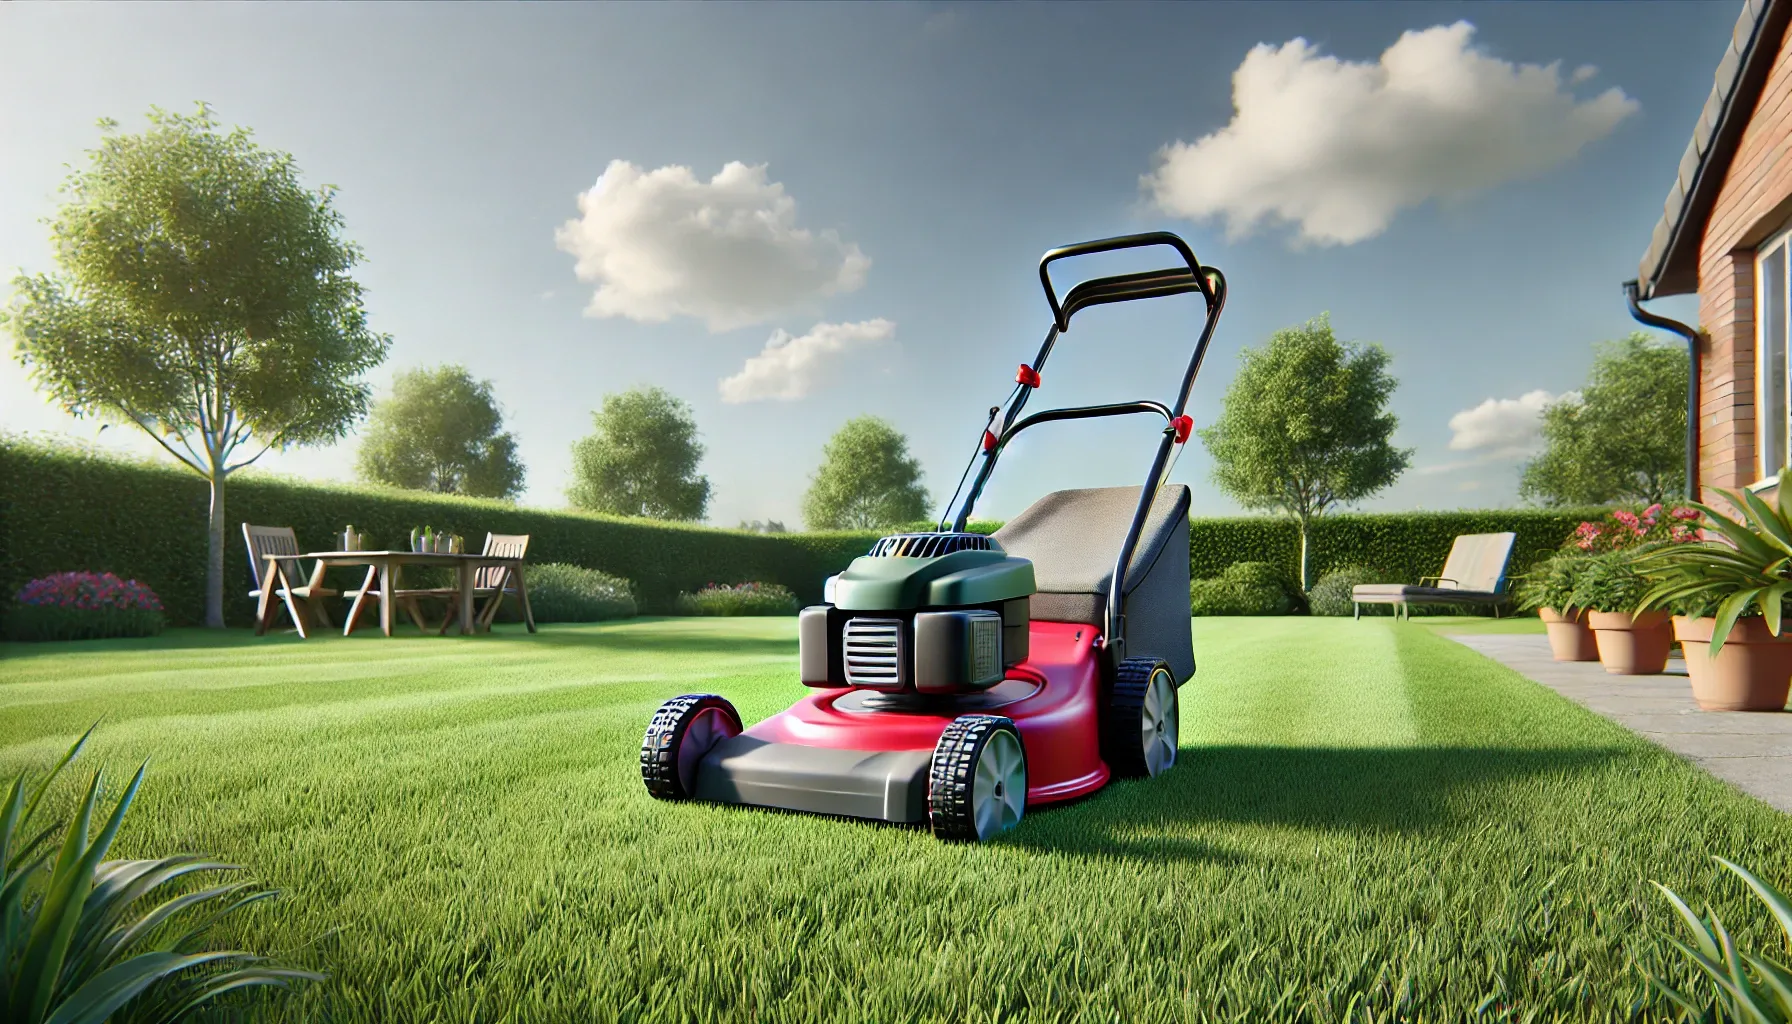 A lawnmower on a freshly cut lawn with vibrant grass